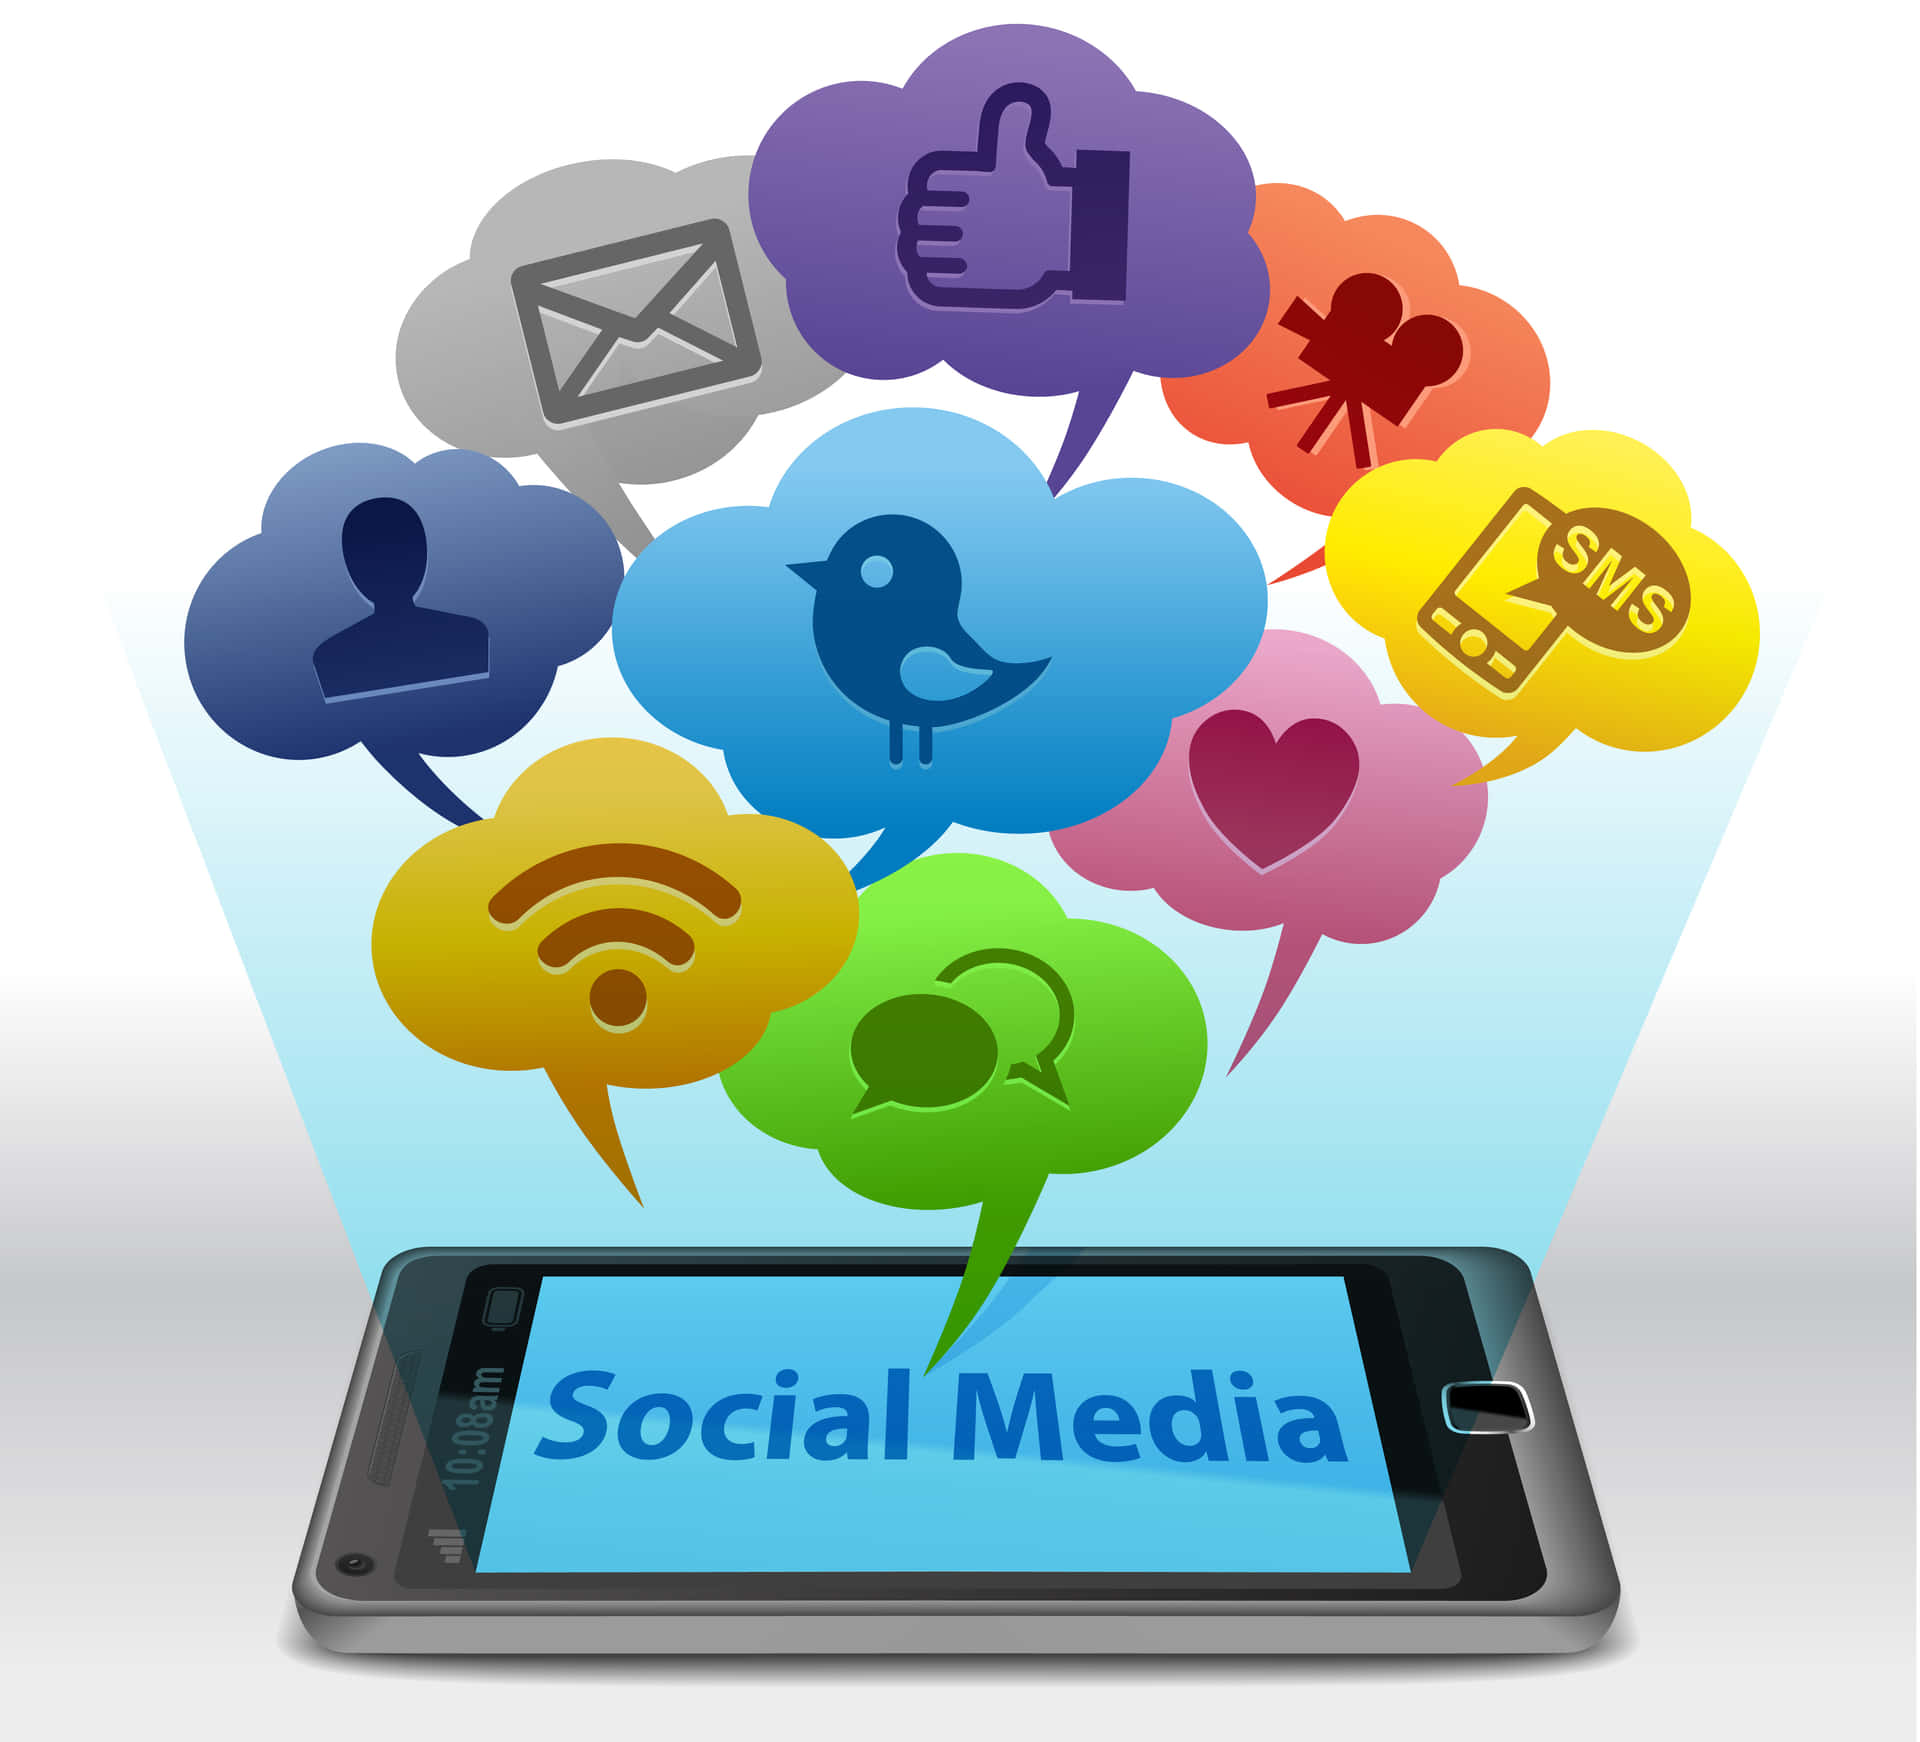 Social Media Marketing - A Mobile Phone With Social Media Icons